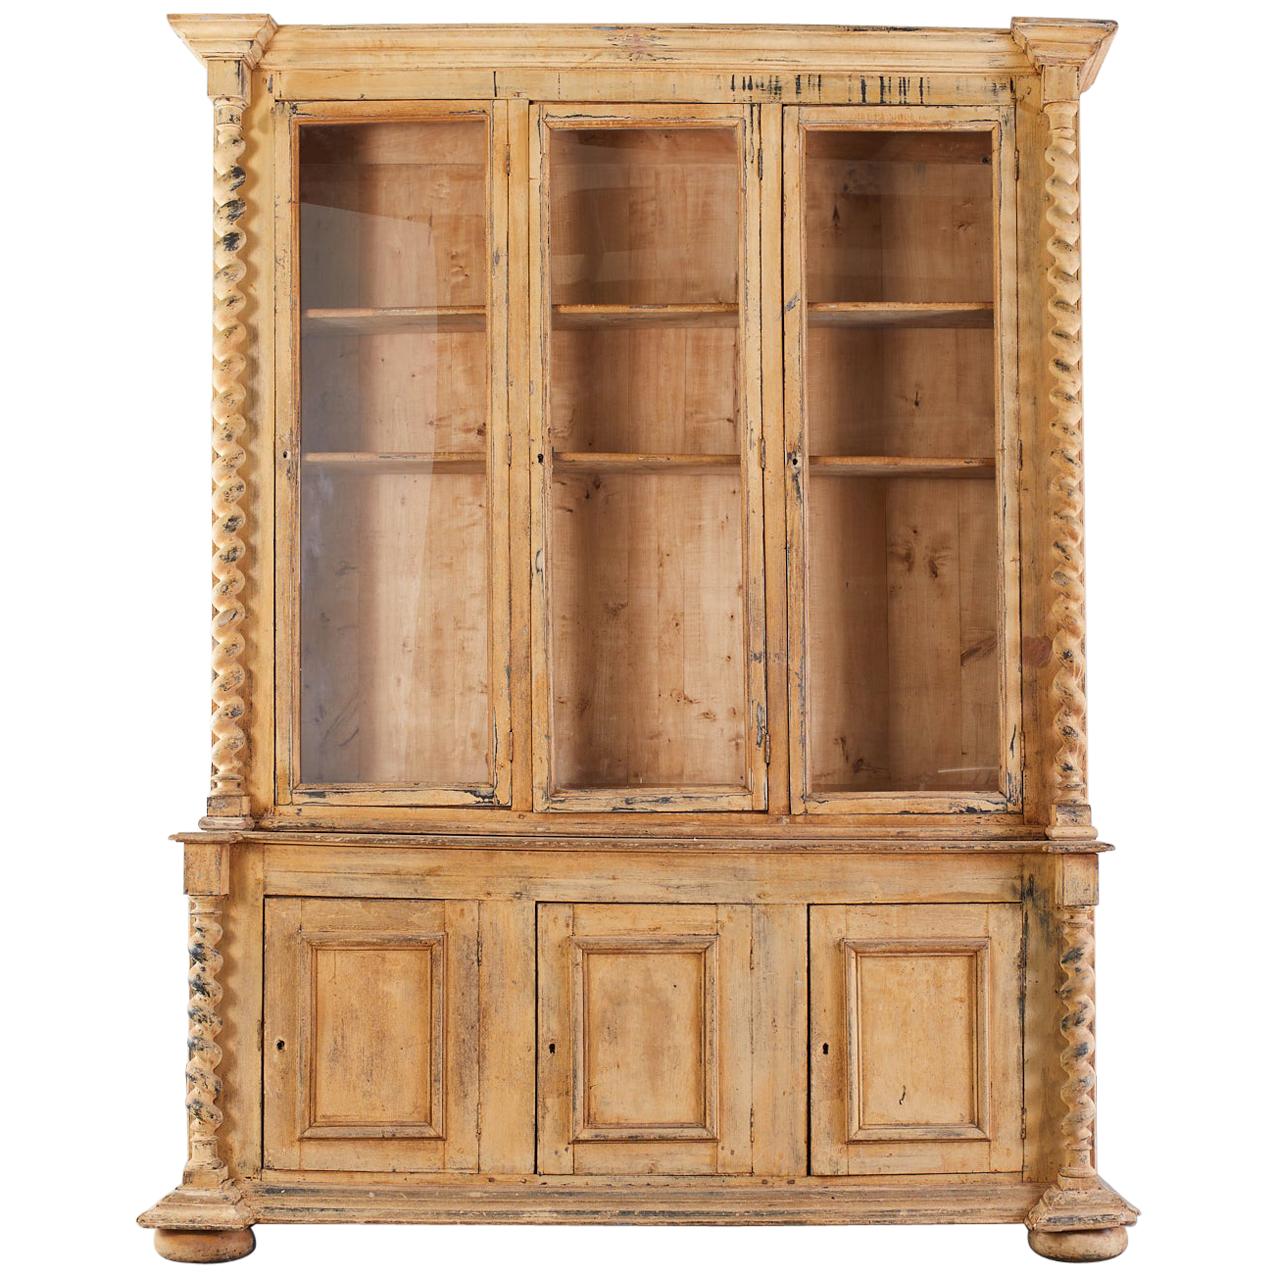 19th Century Country French Rustic Whitewashed Bookcase Cabinet For